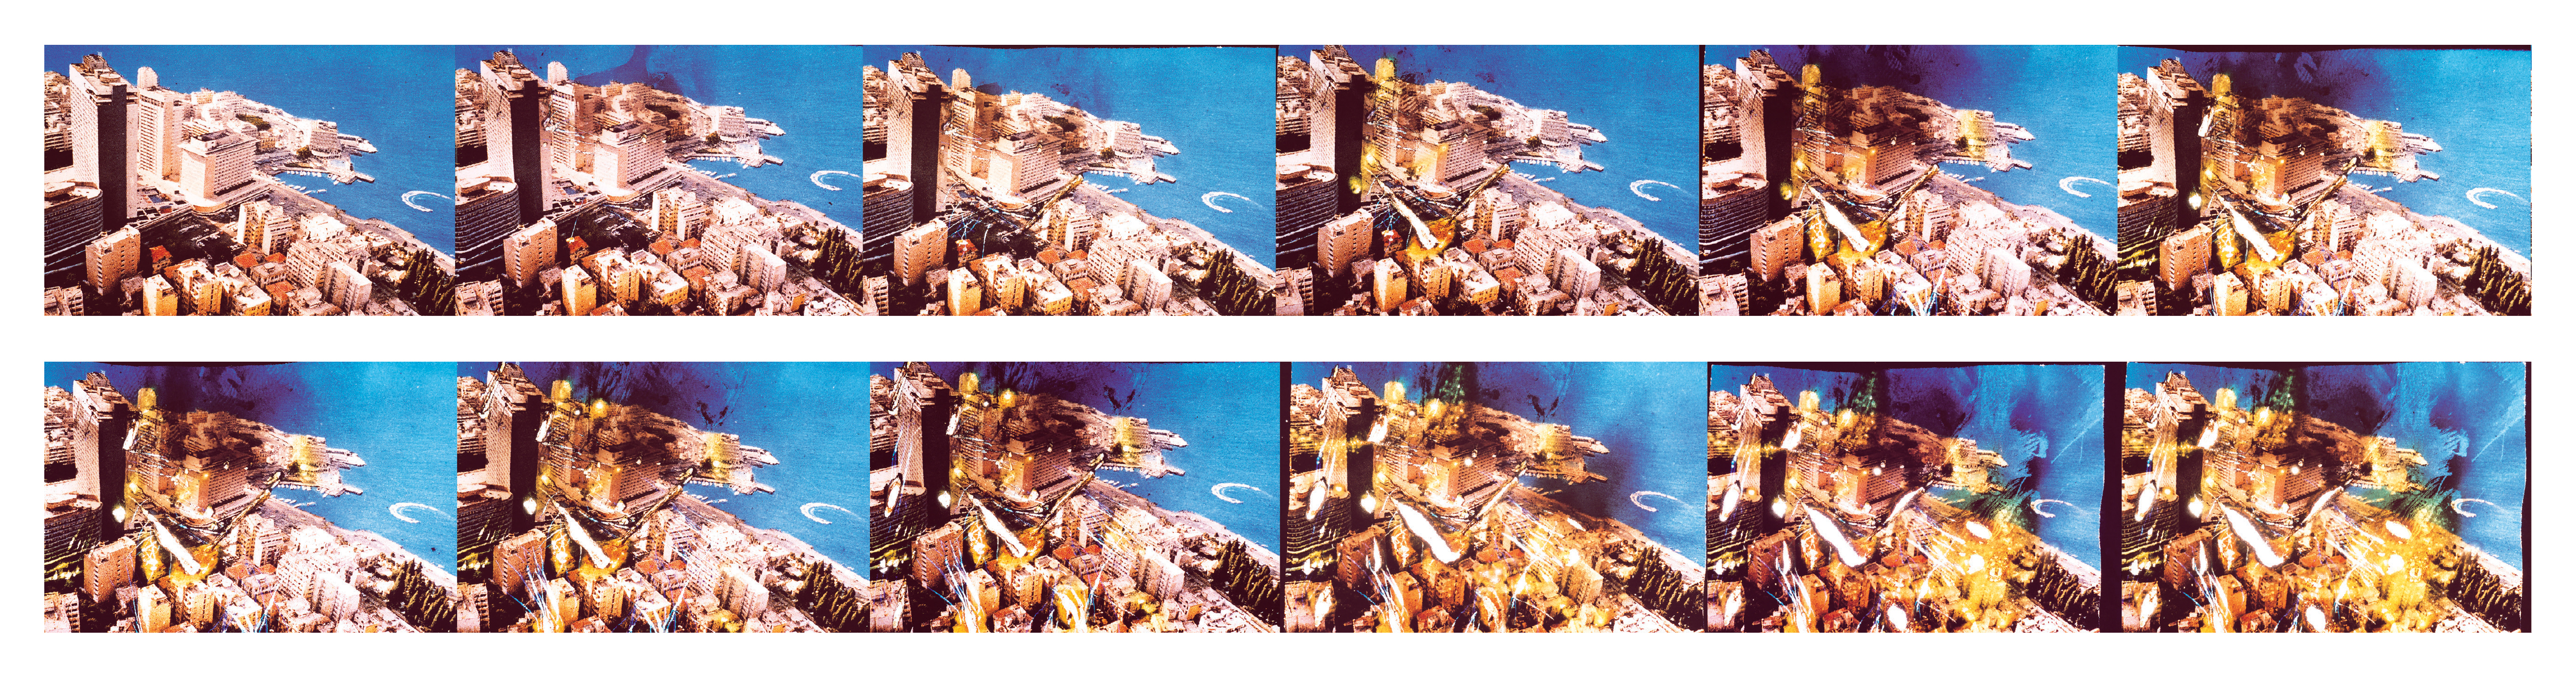 Twelve iterations of Farah’s postcard titled “The Great Hotels of the Lebanese Riviera: The Saint Georges” showing the step-by-step deterioration of the negative.